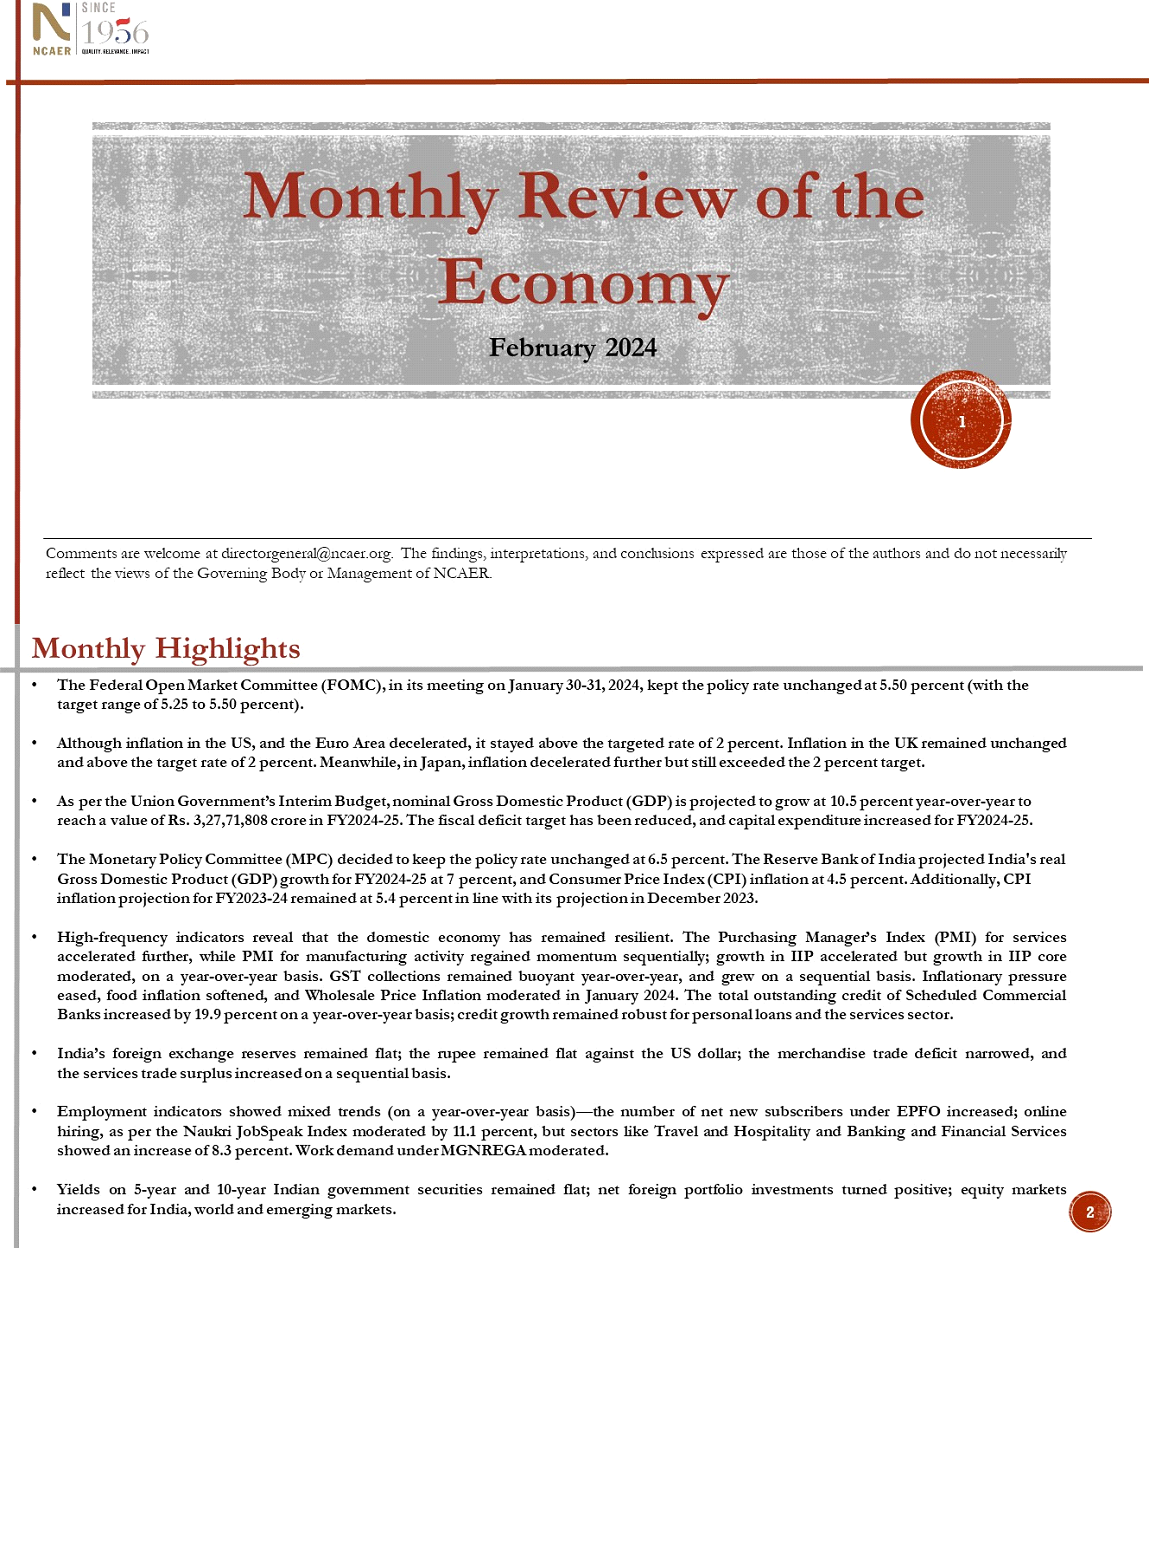 Monthly Review of the Economy: February 2024